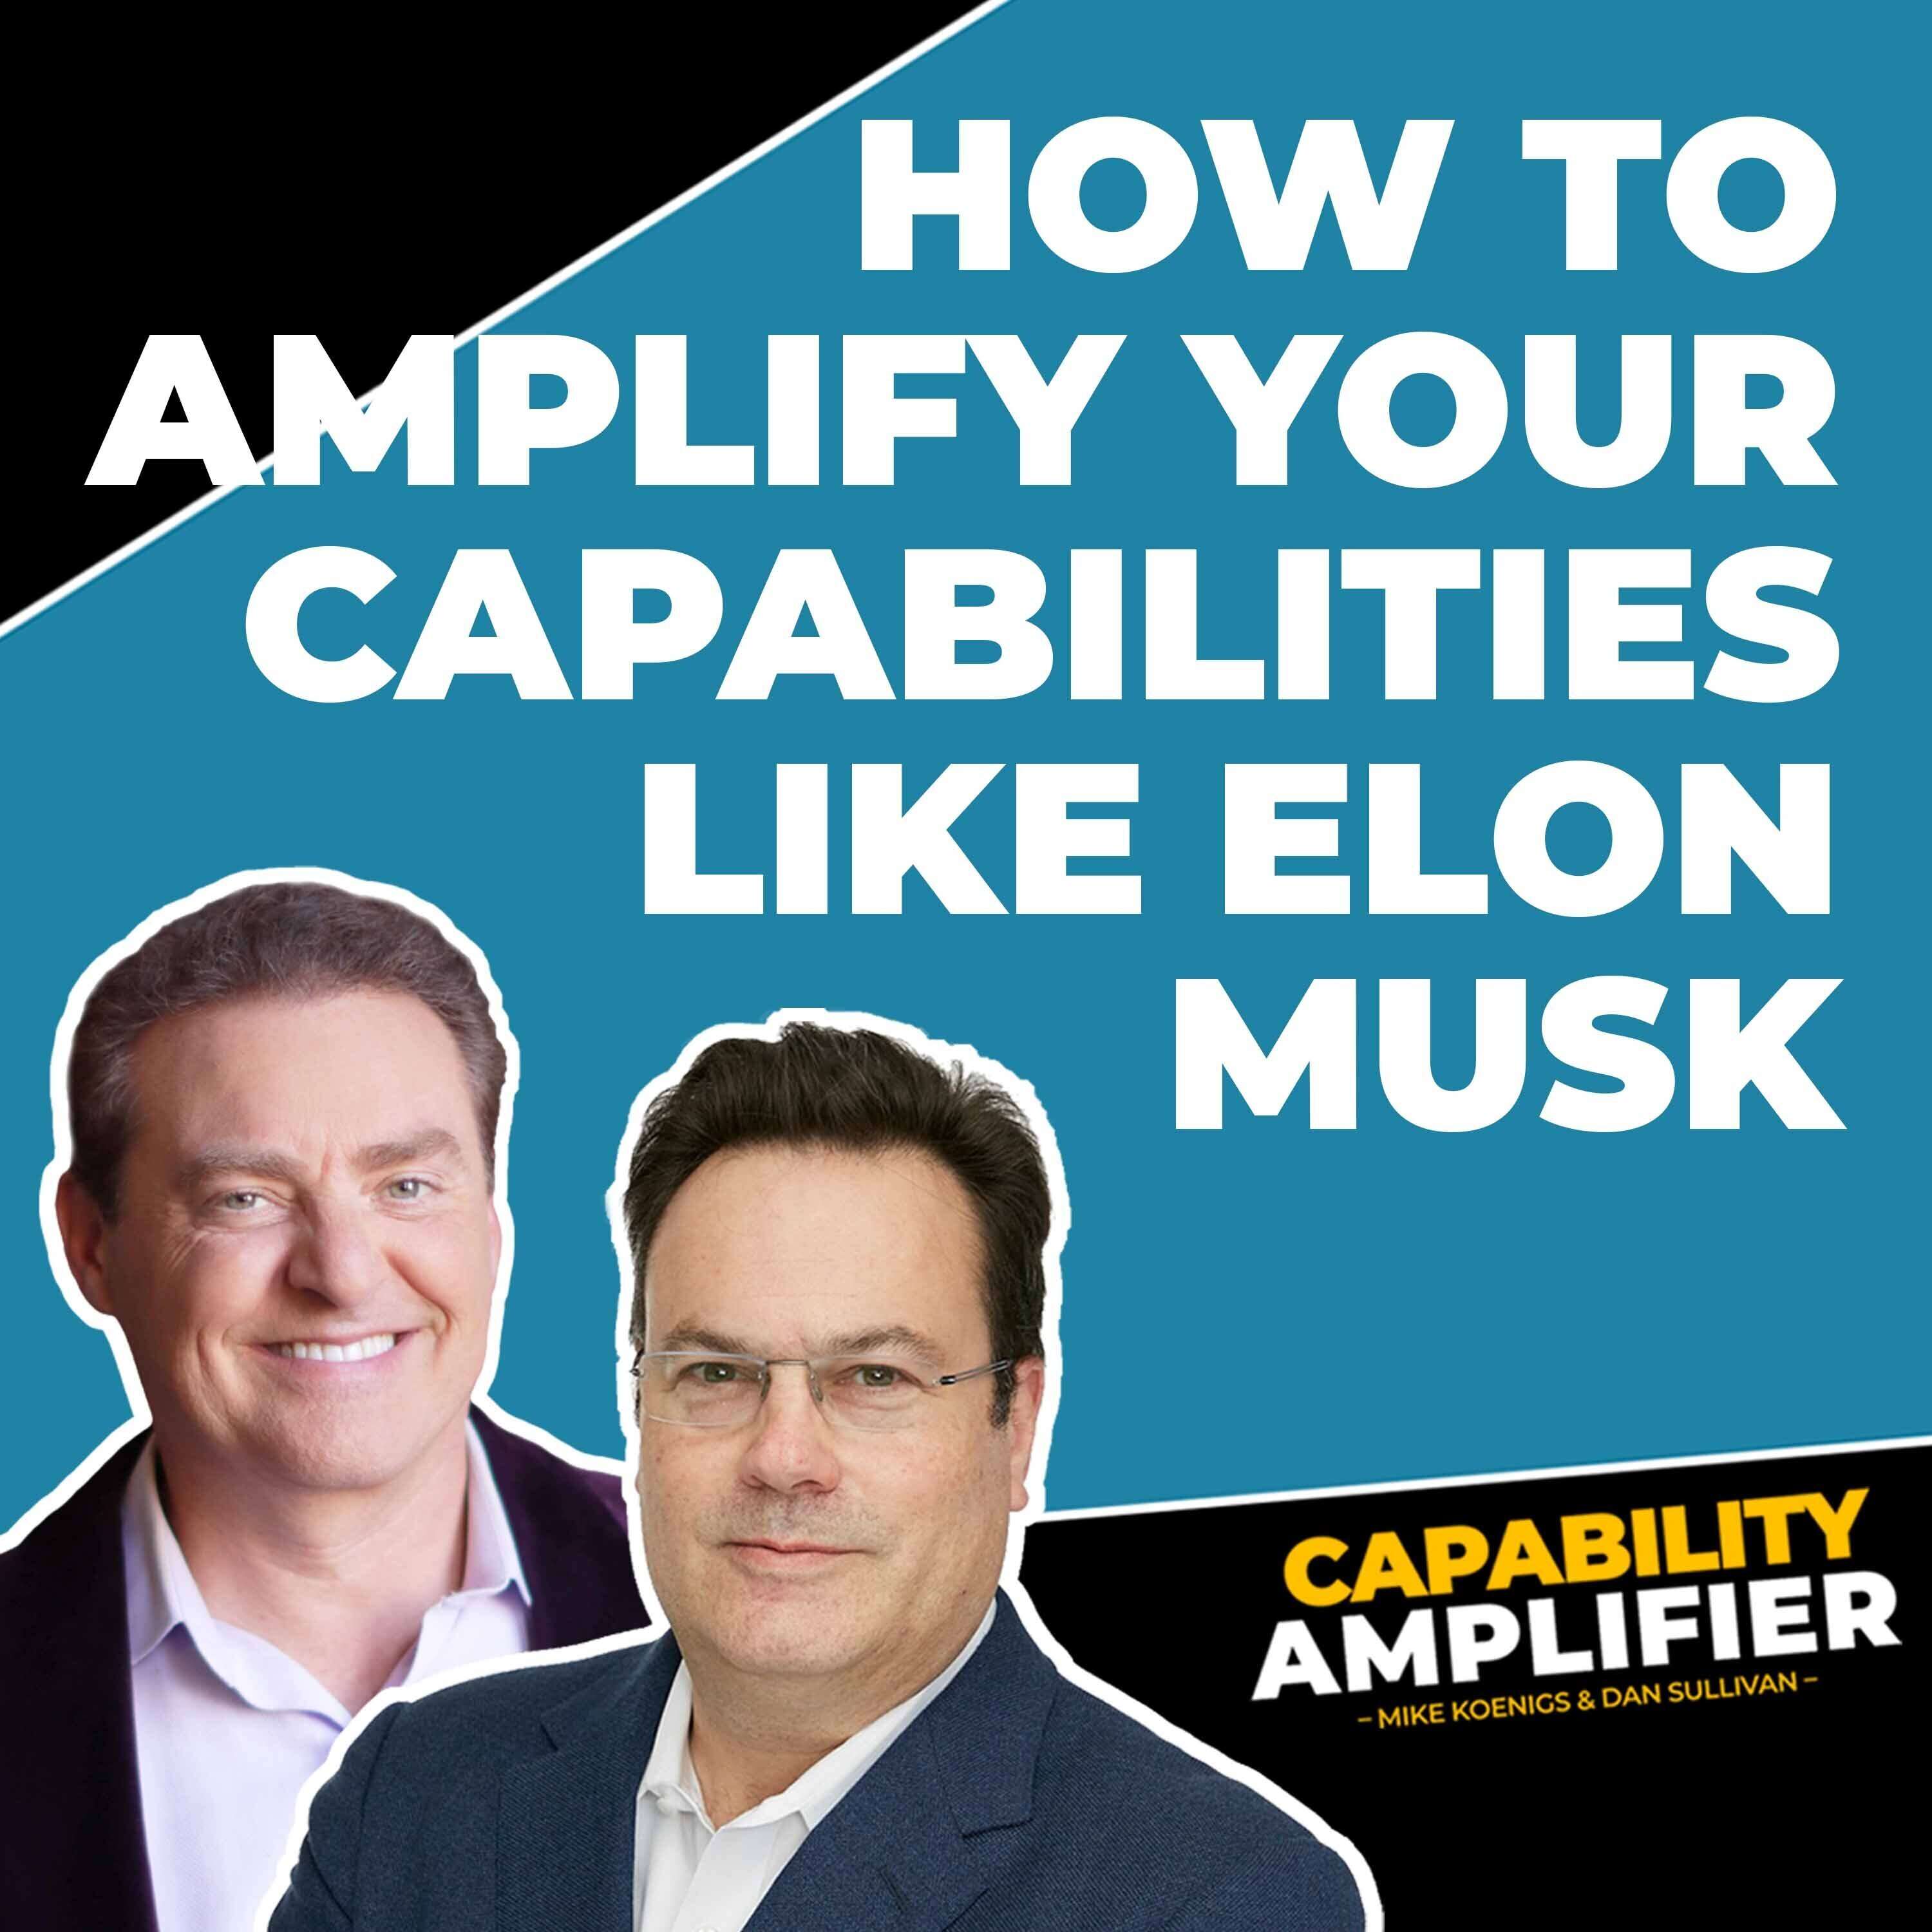 How to Amplify Your Capabilities Like Elon Musk